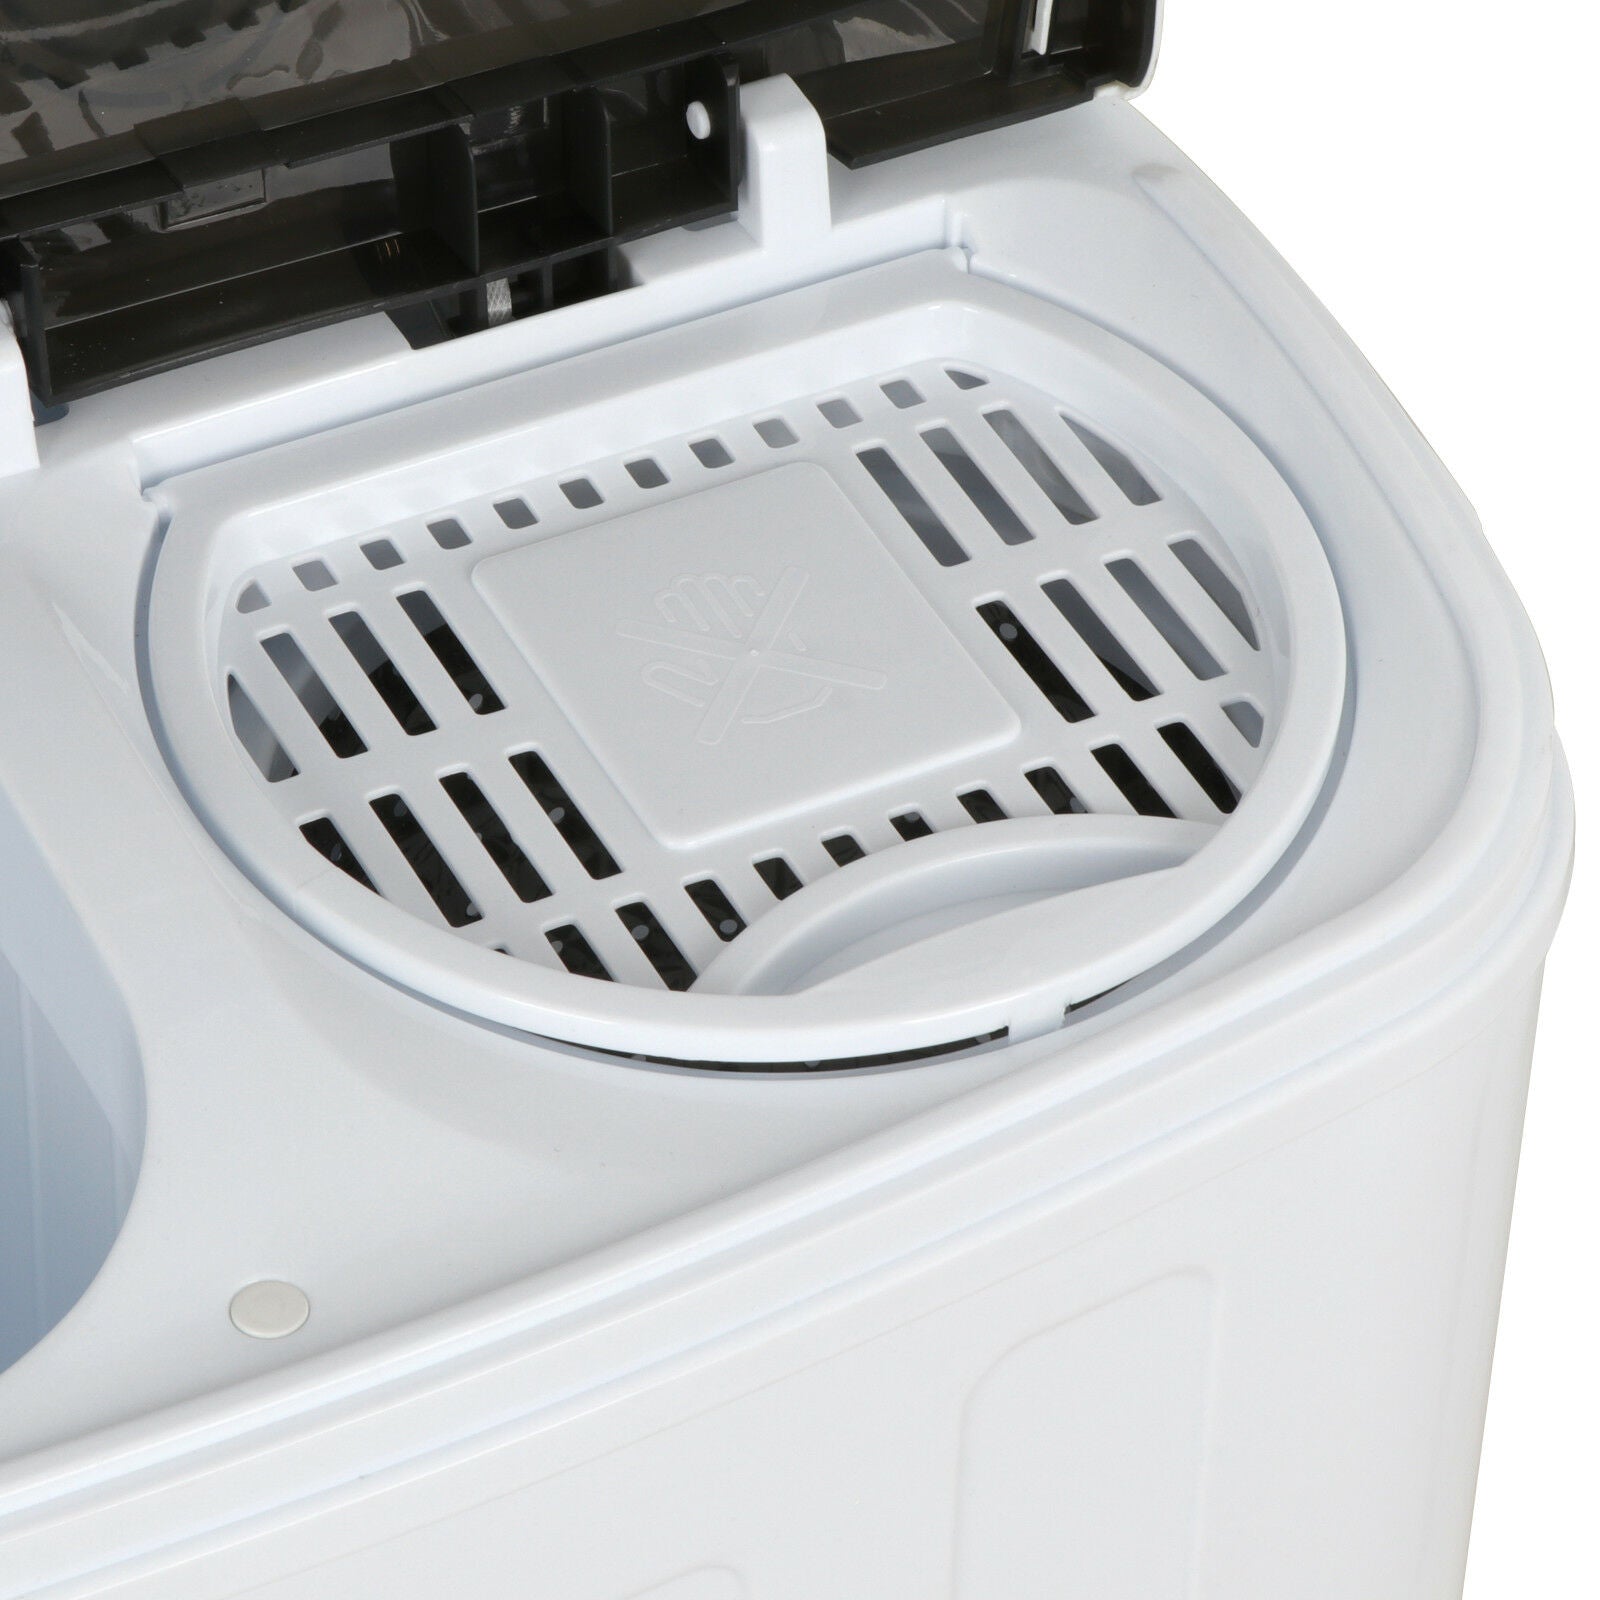 Compact Portable Washer/Dryer with Mini Washing Machine and Spin Dryer, White